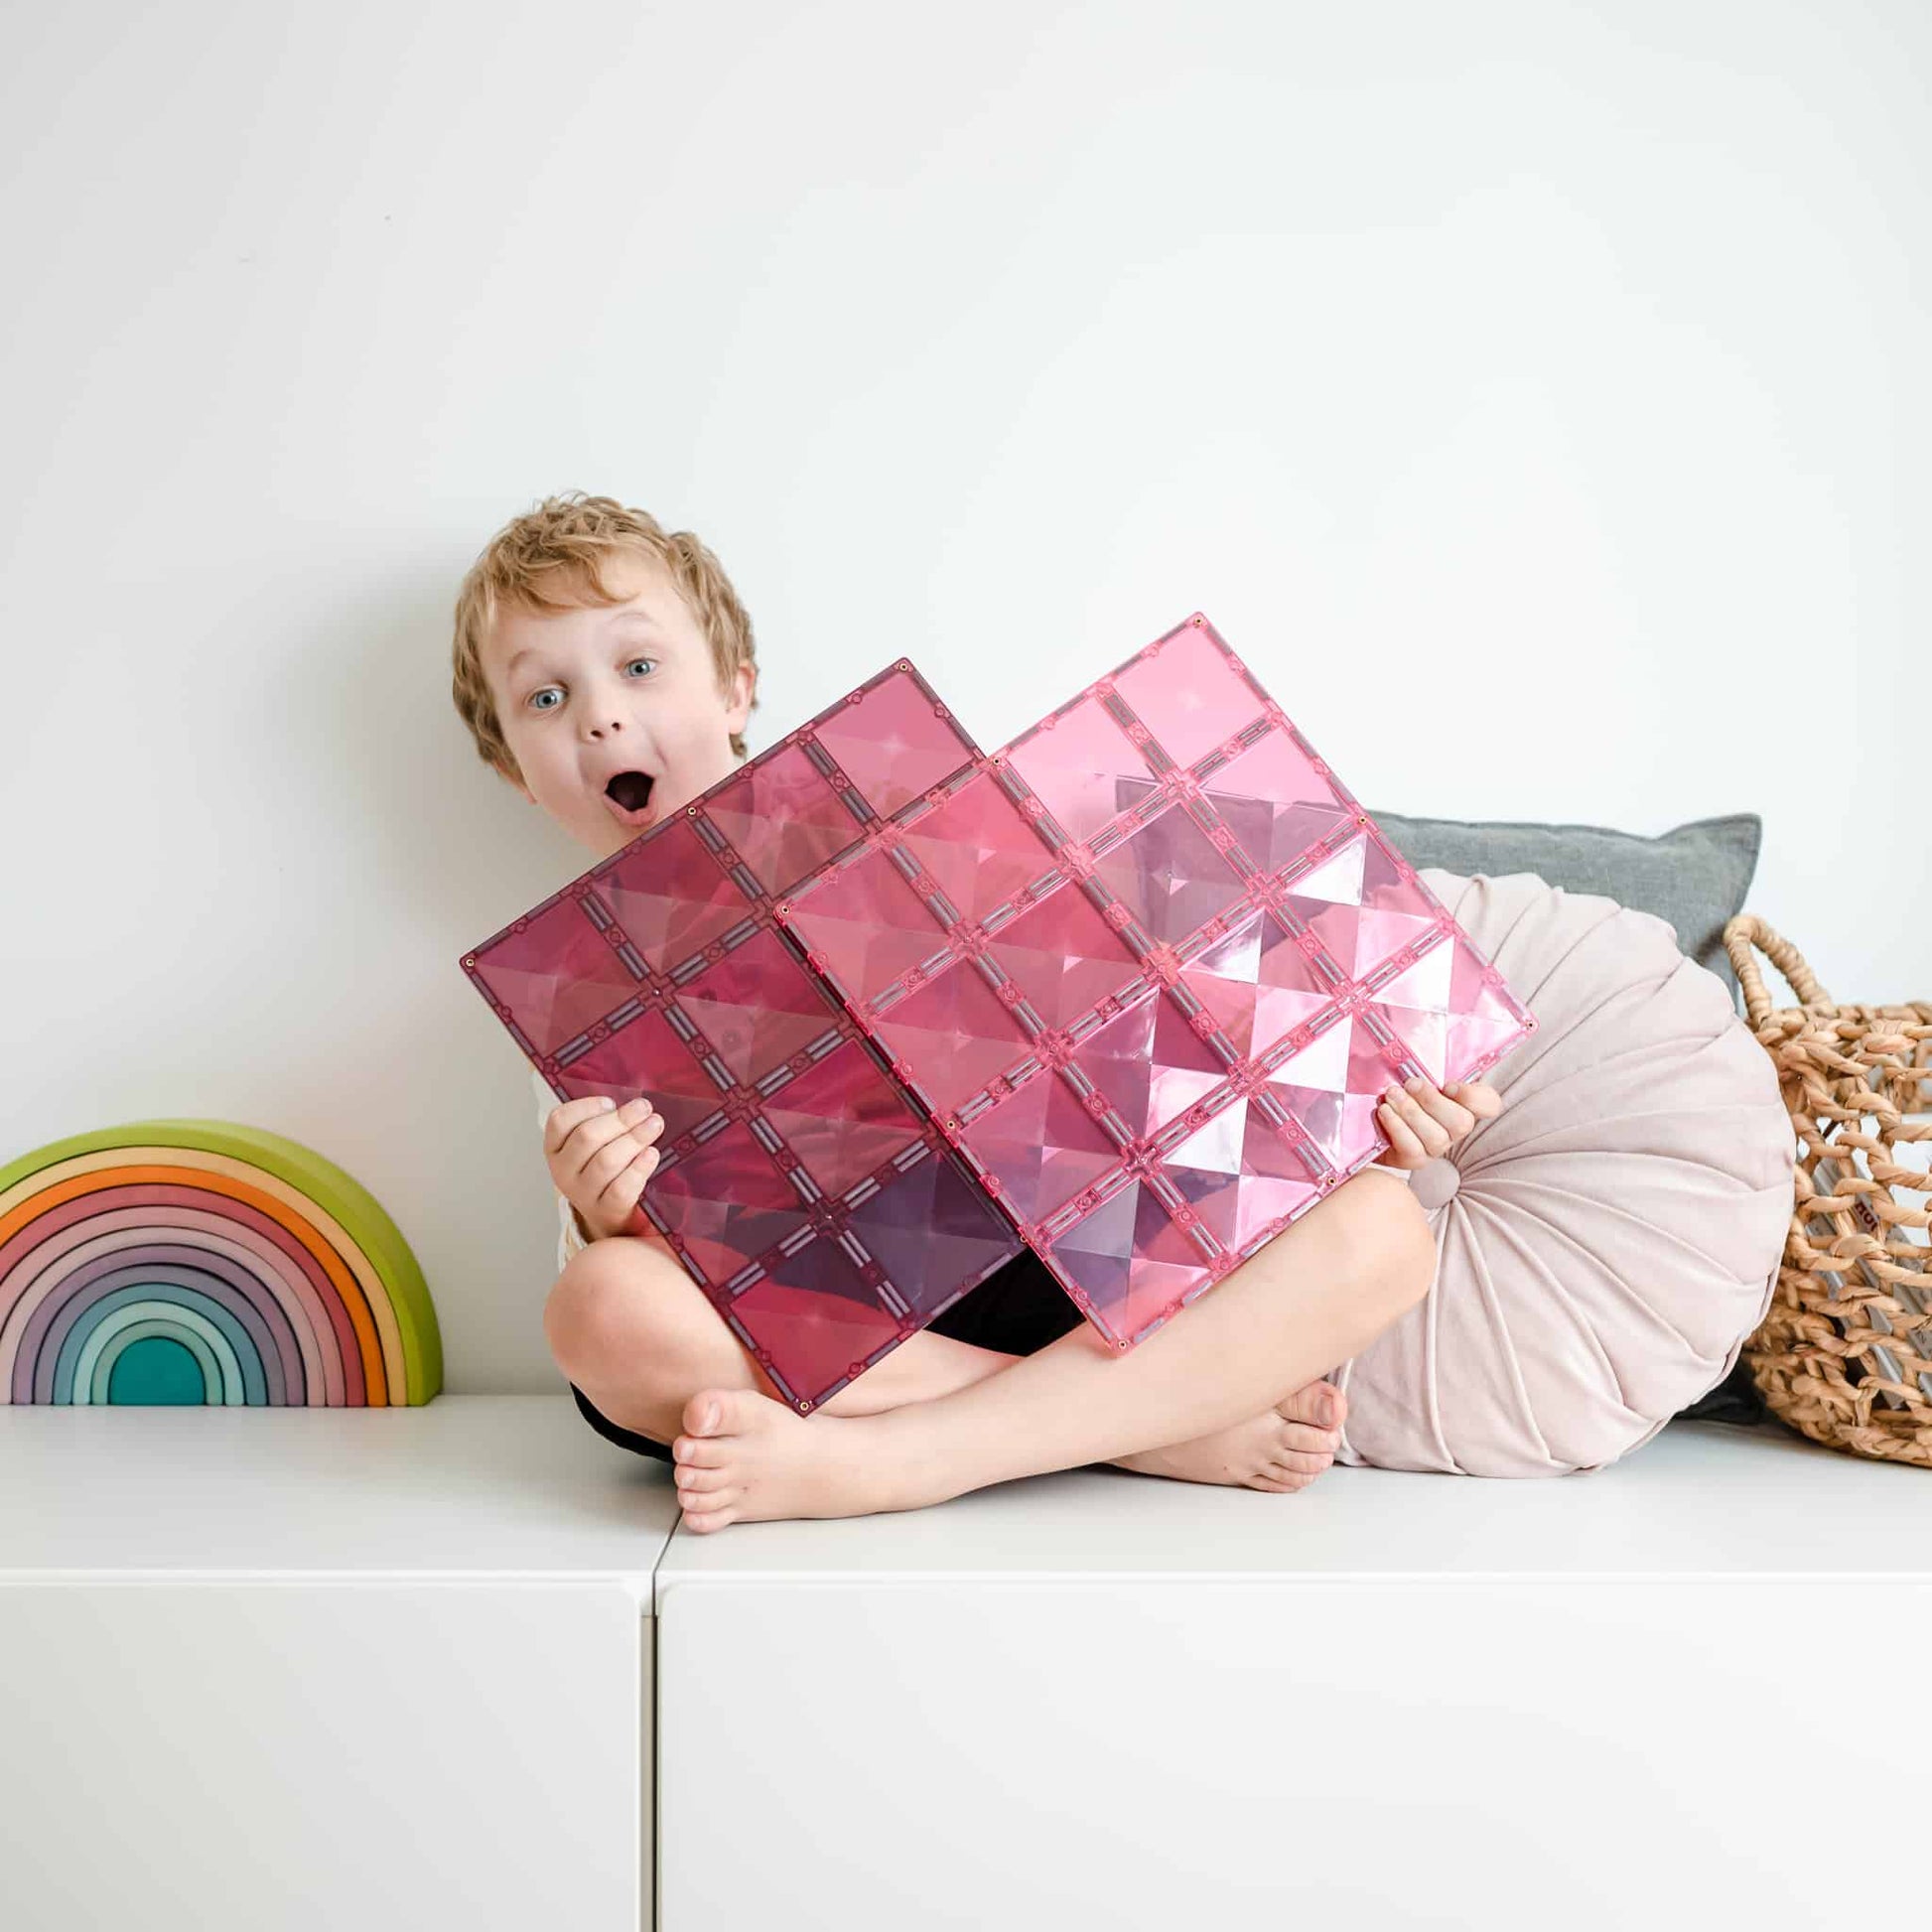 Connetix Tiles | 2 Piece Base Plate Pack - Pink & Berry available at Bear & Moo